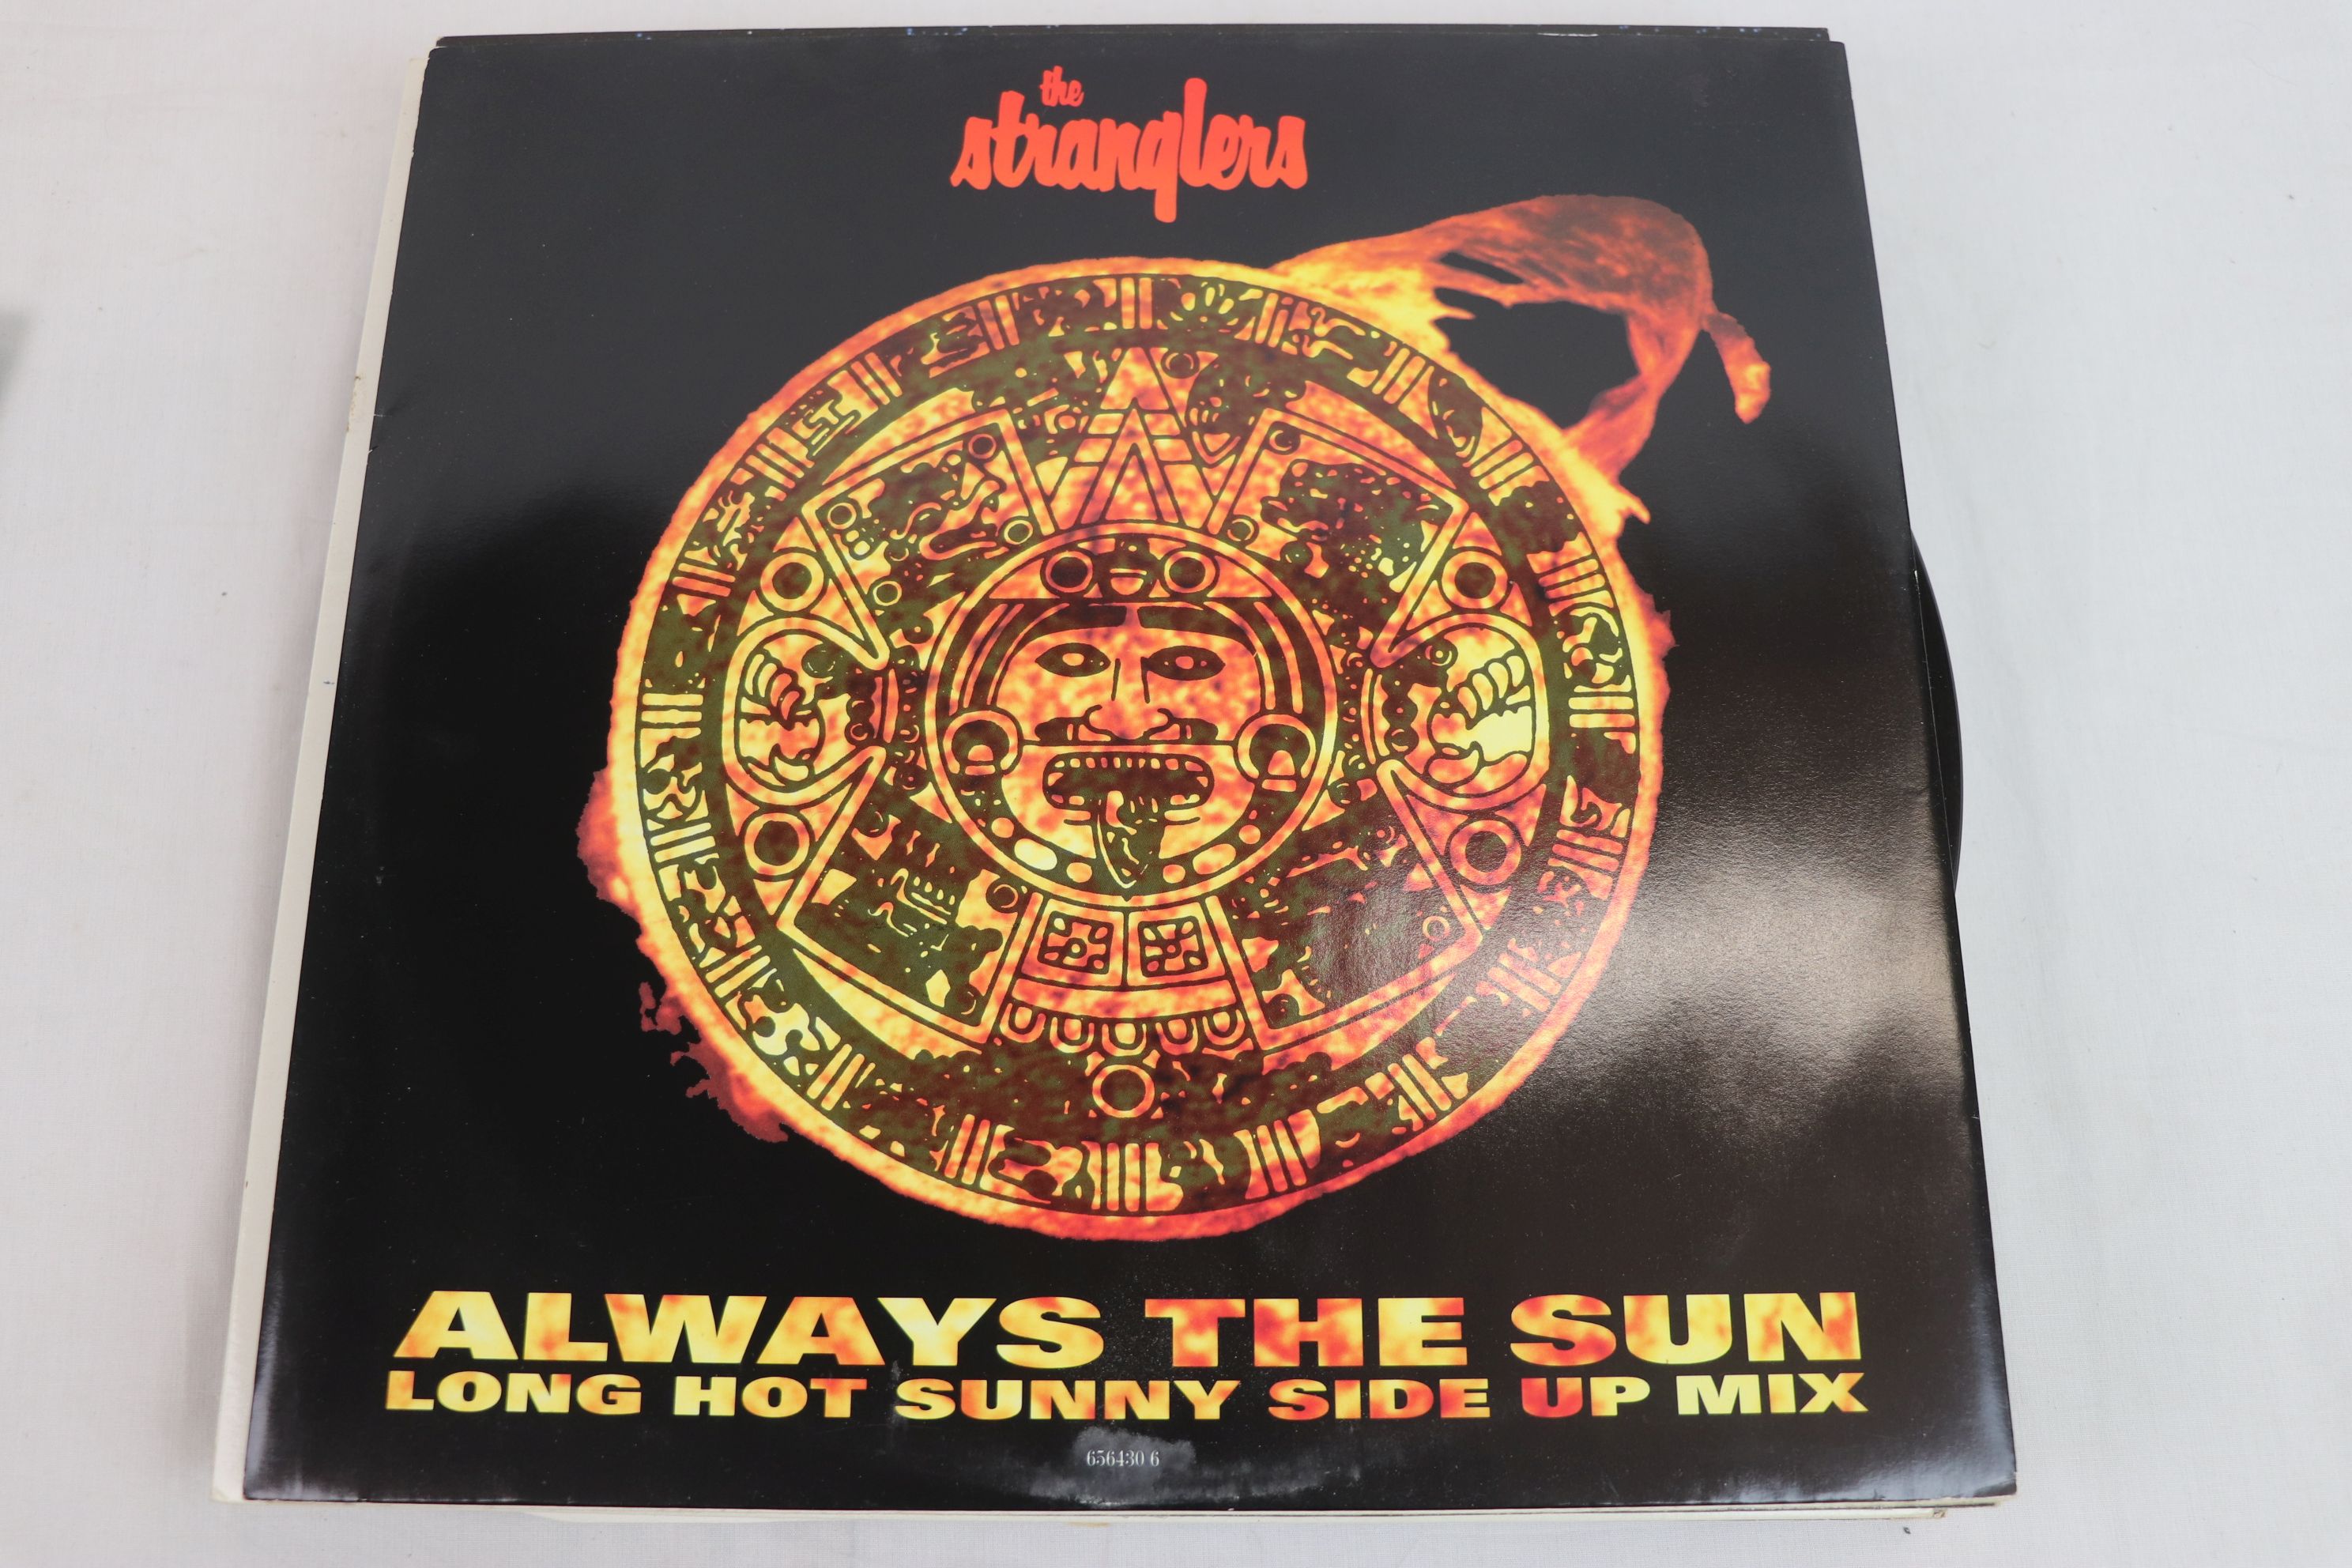 Vinyl - The Stranglers - Collection of 24 x 12" Singles, 3 x picture discs and 3 x LPs (The Raven, - Image 10 of 12